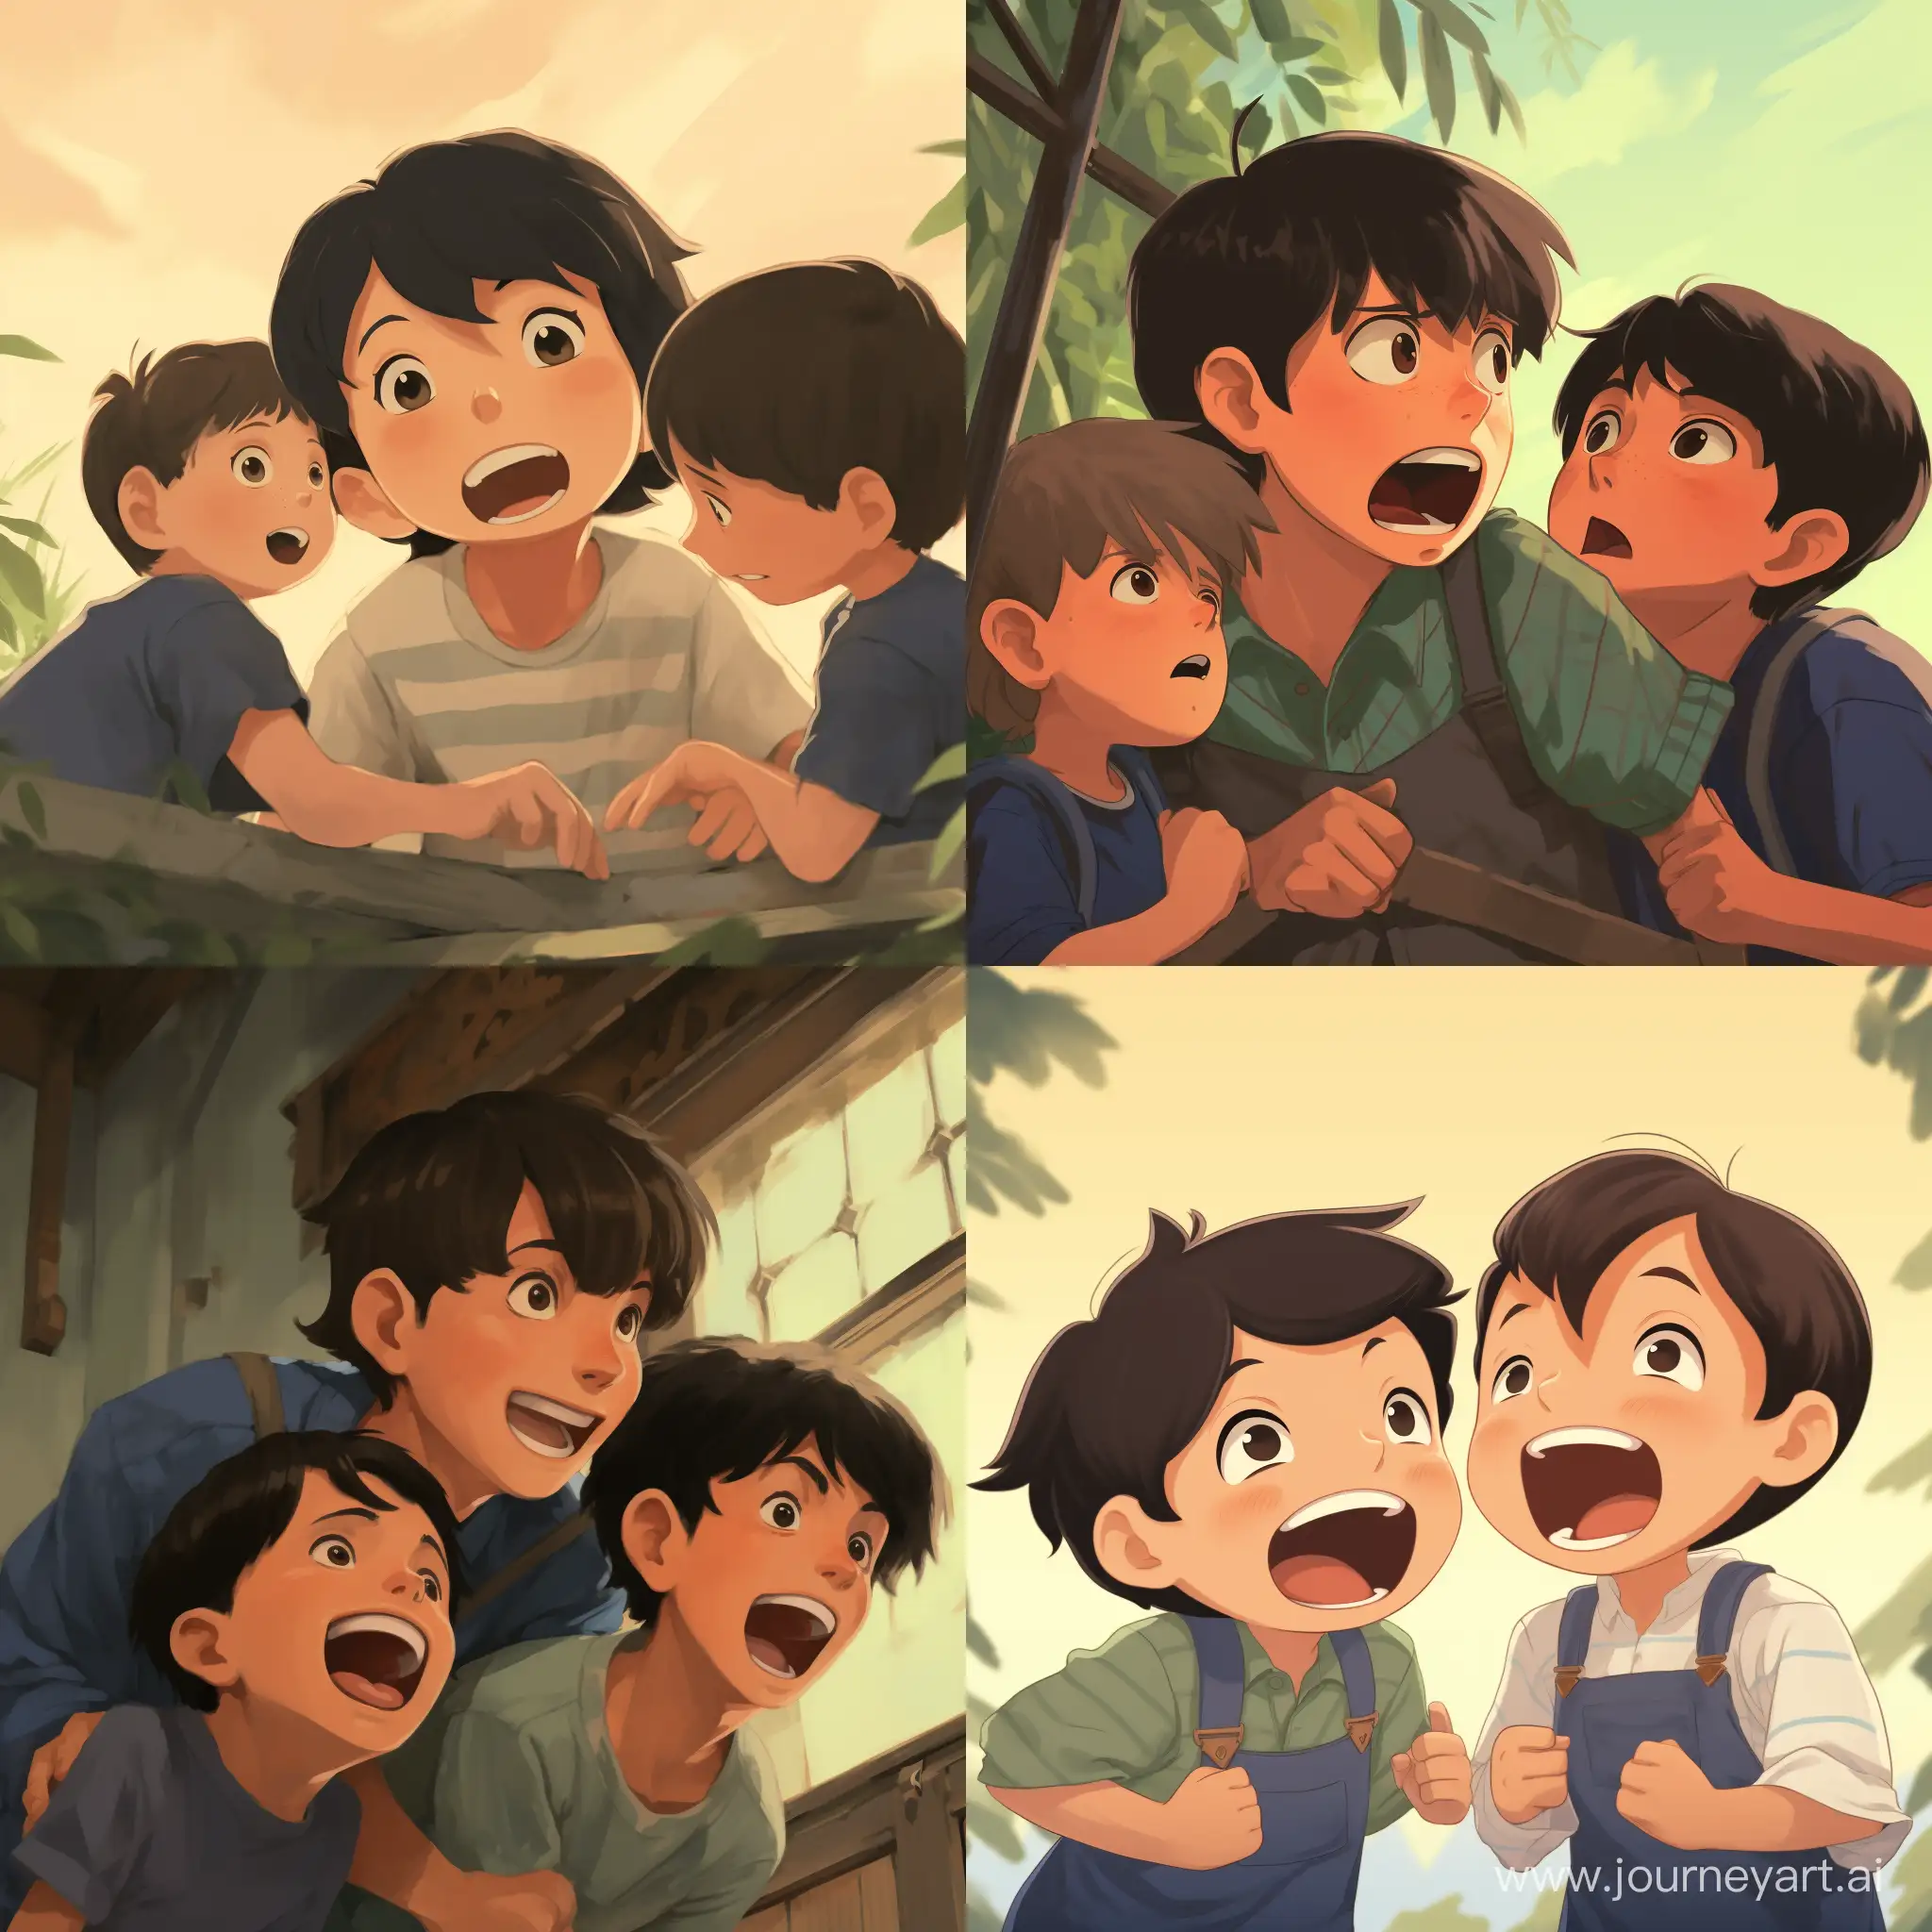 studio ghibli art style. black haired boy getting bullied, pushed, teased, laugh by two naughty and angry boys